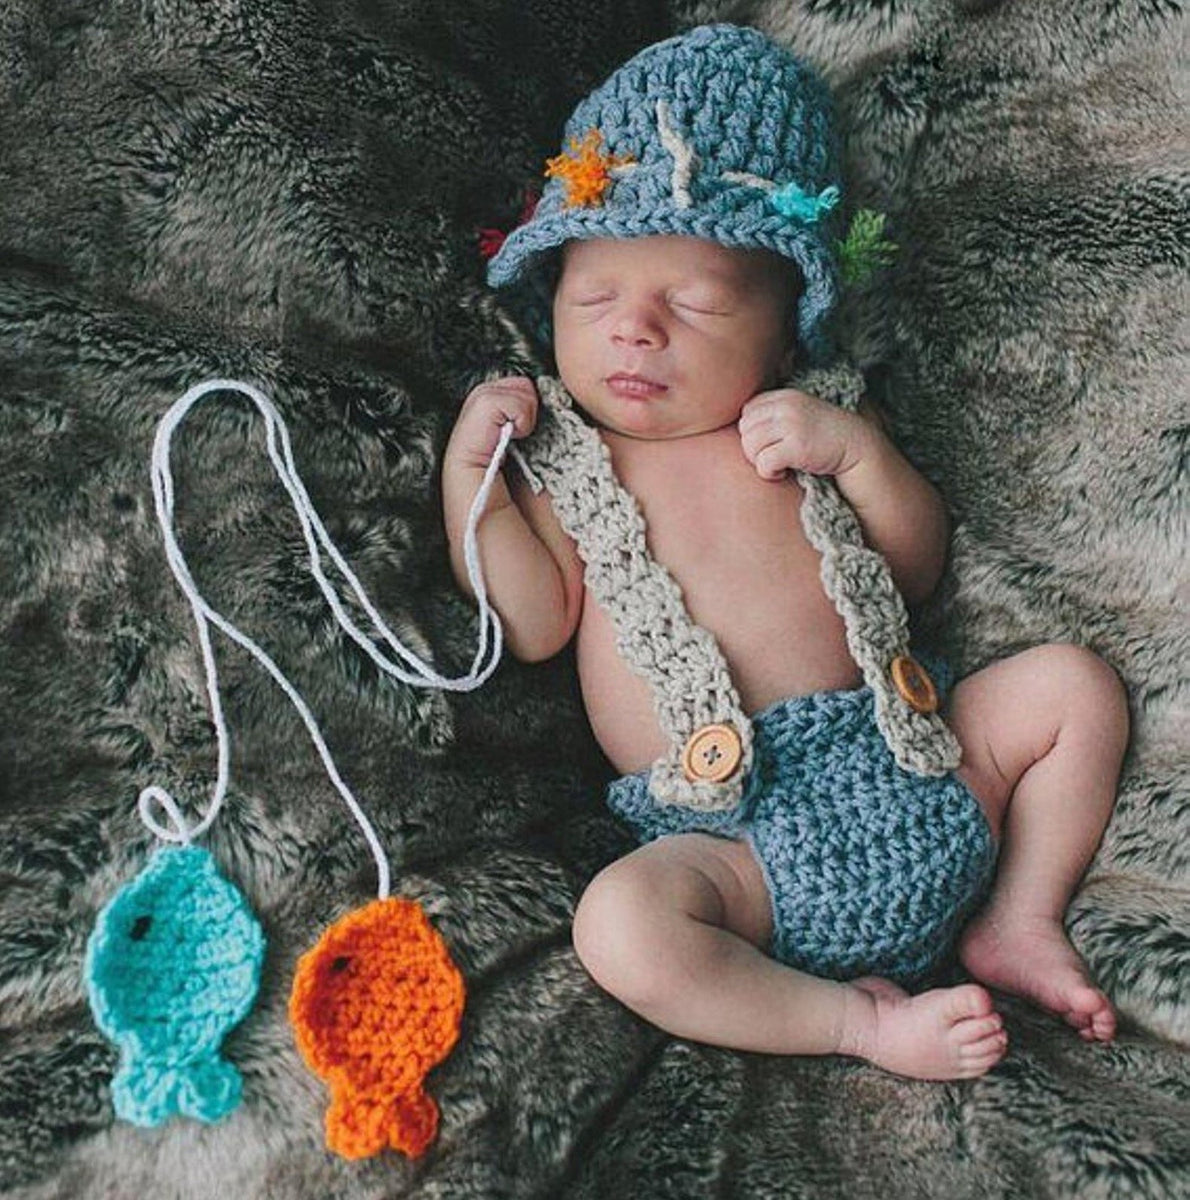 Crochet Baby Fishing Outfits – Tagged fisherman outfit – CrochetBabyProps